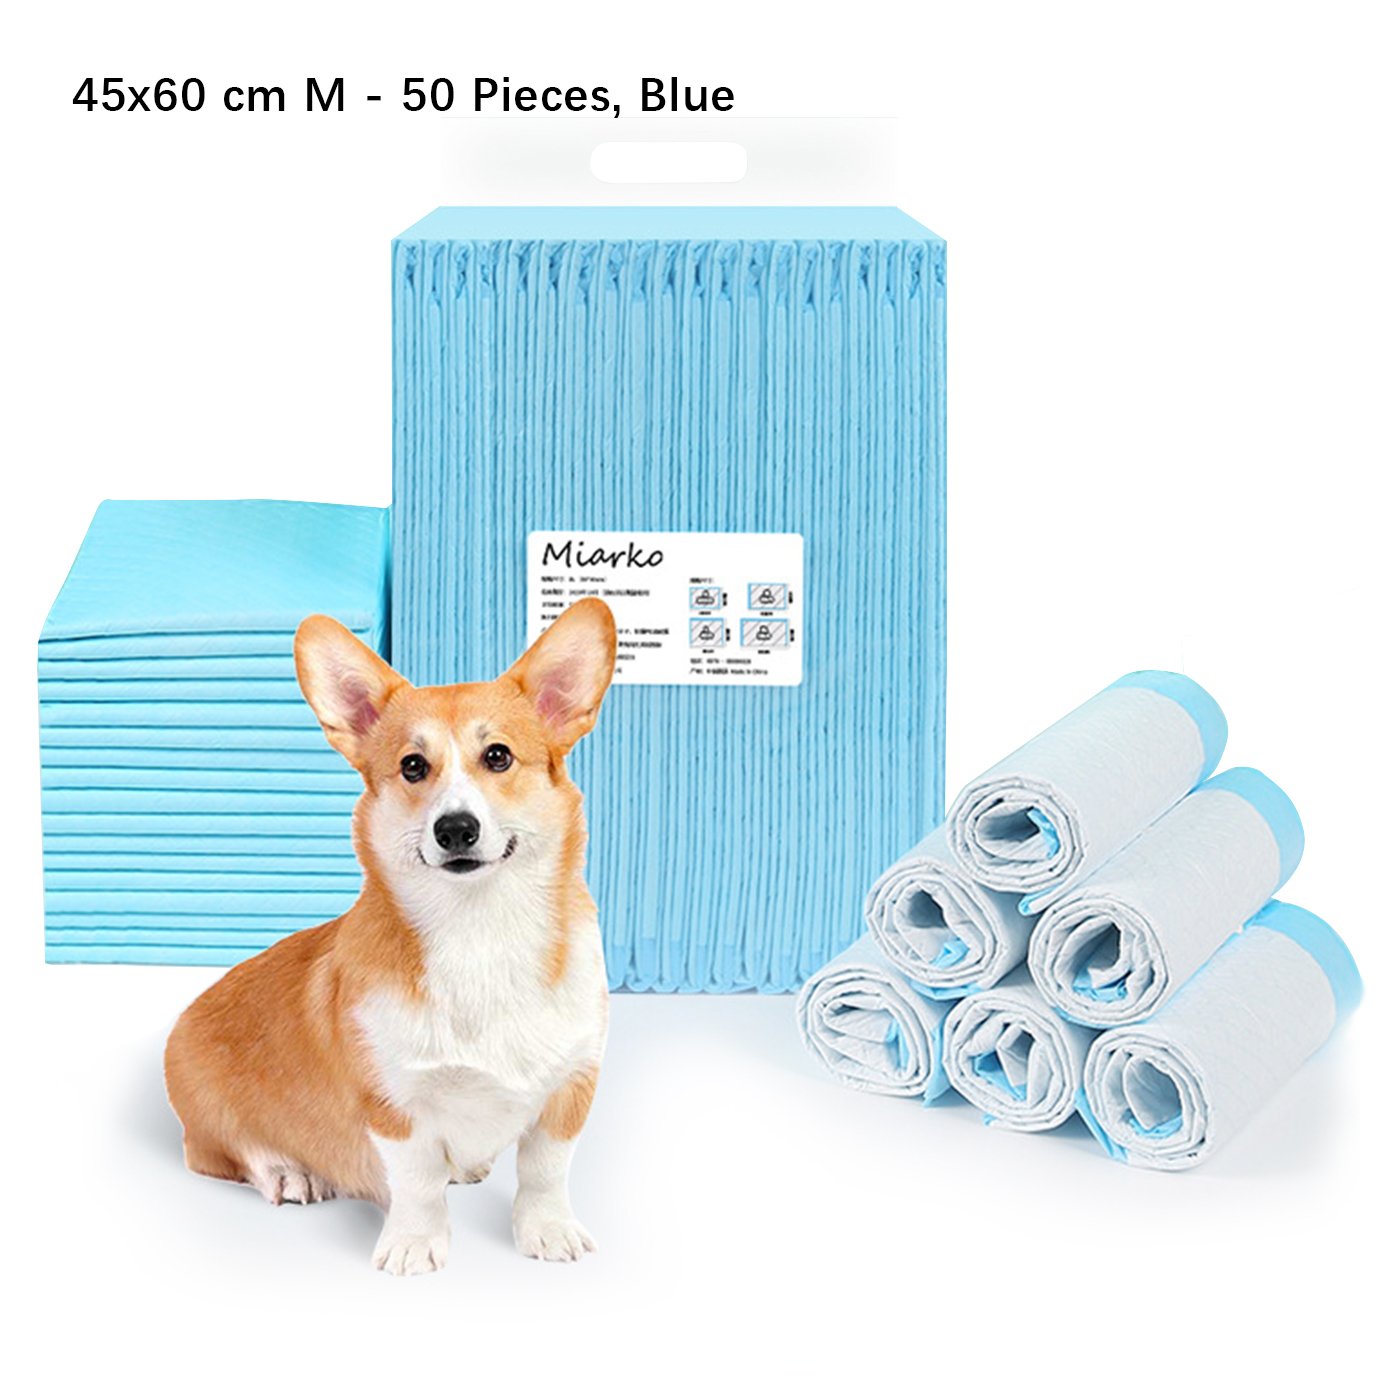 Pet Training Pads Disposable Pee Pad for Dog Puppy Cat Rabbits Pets, Quick Drying No Leaking Super Absorbent - Blue